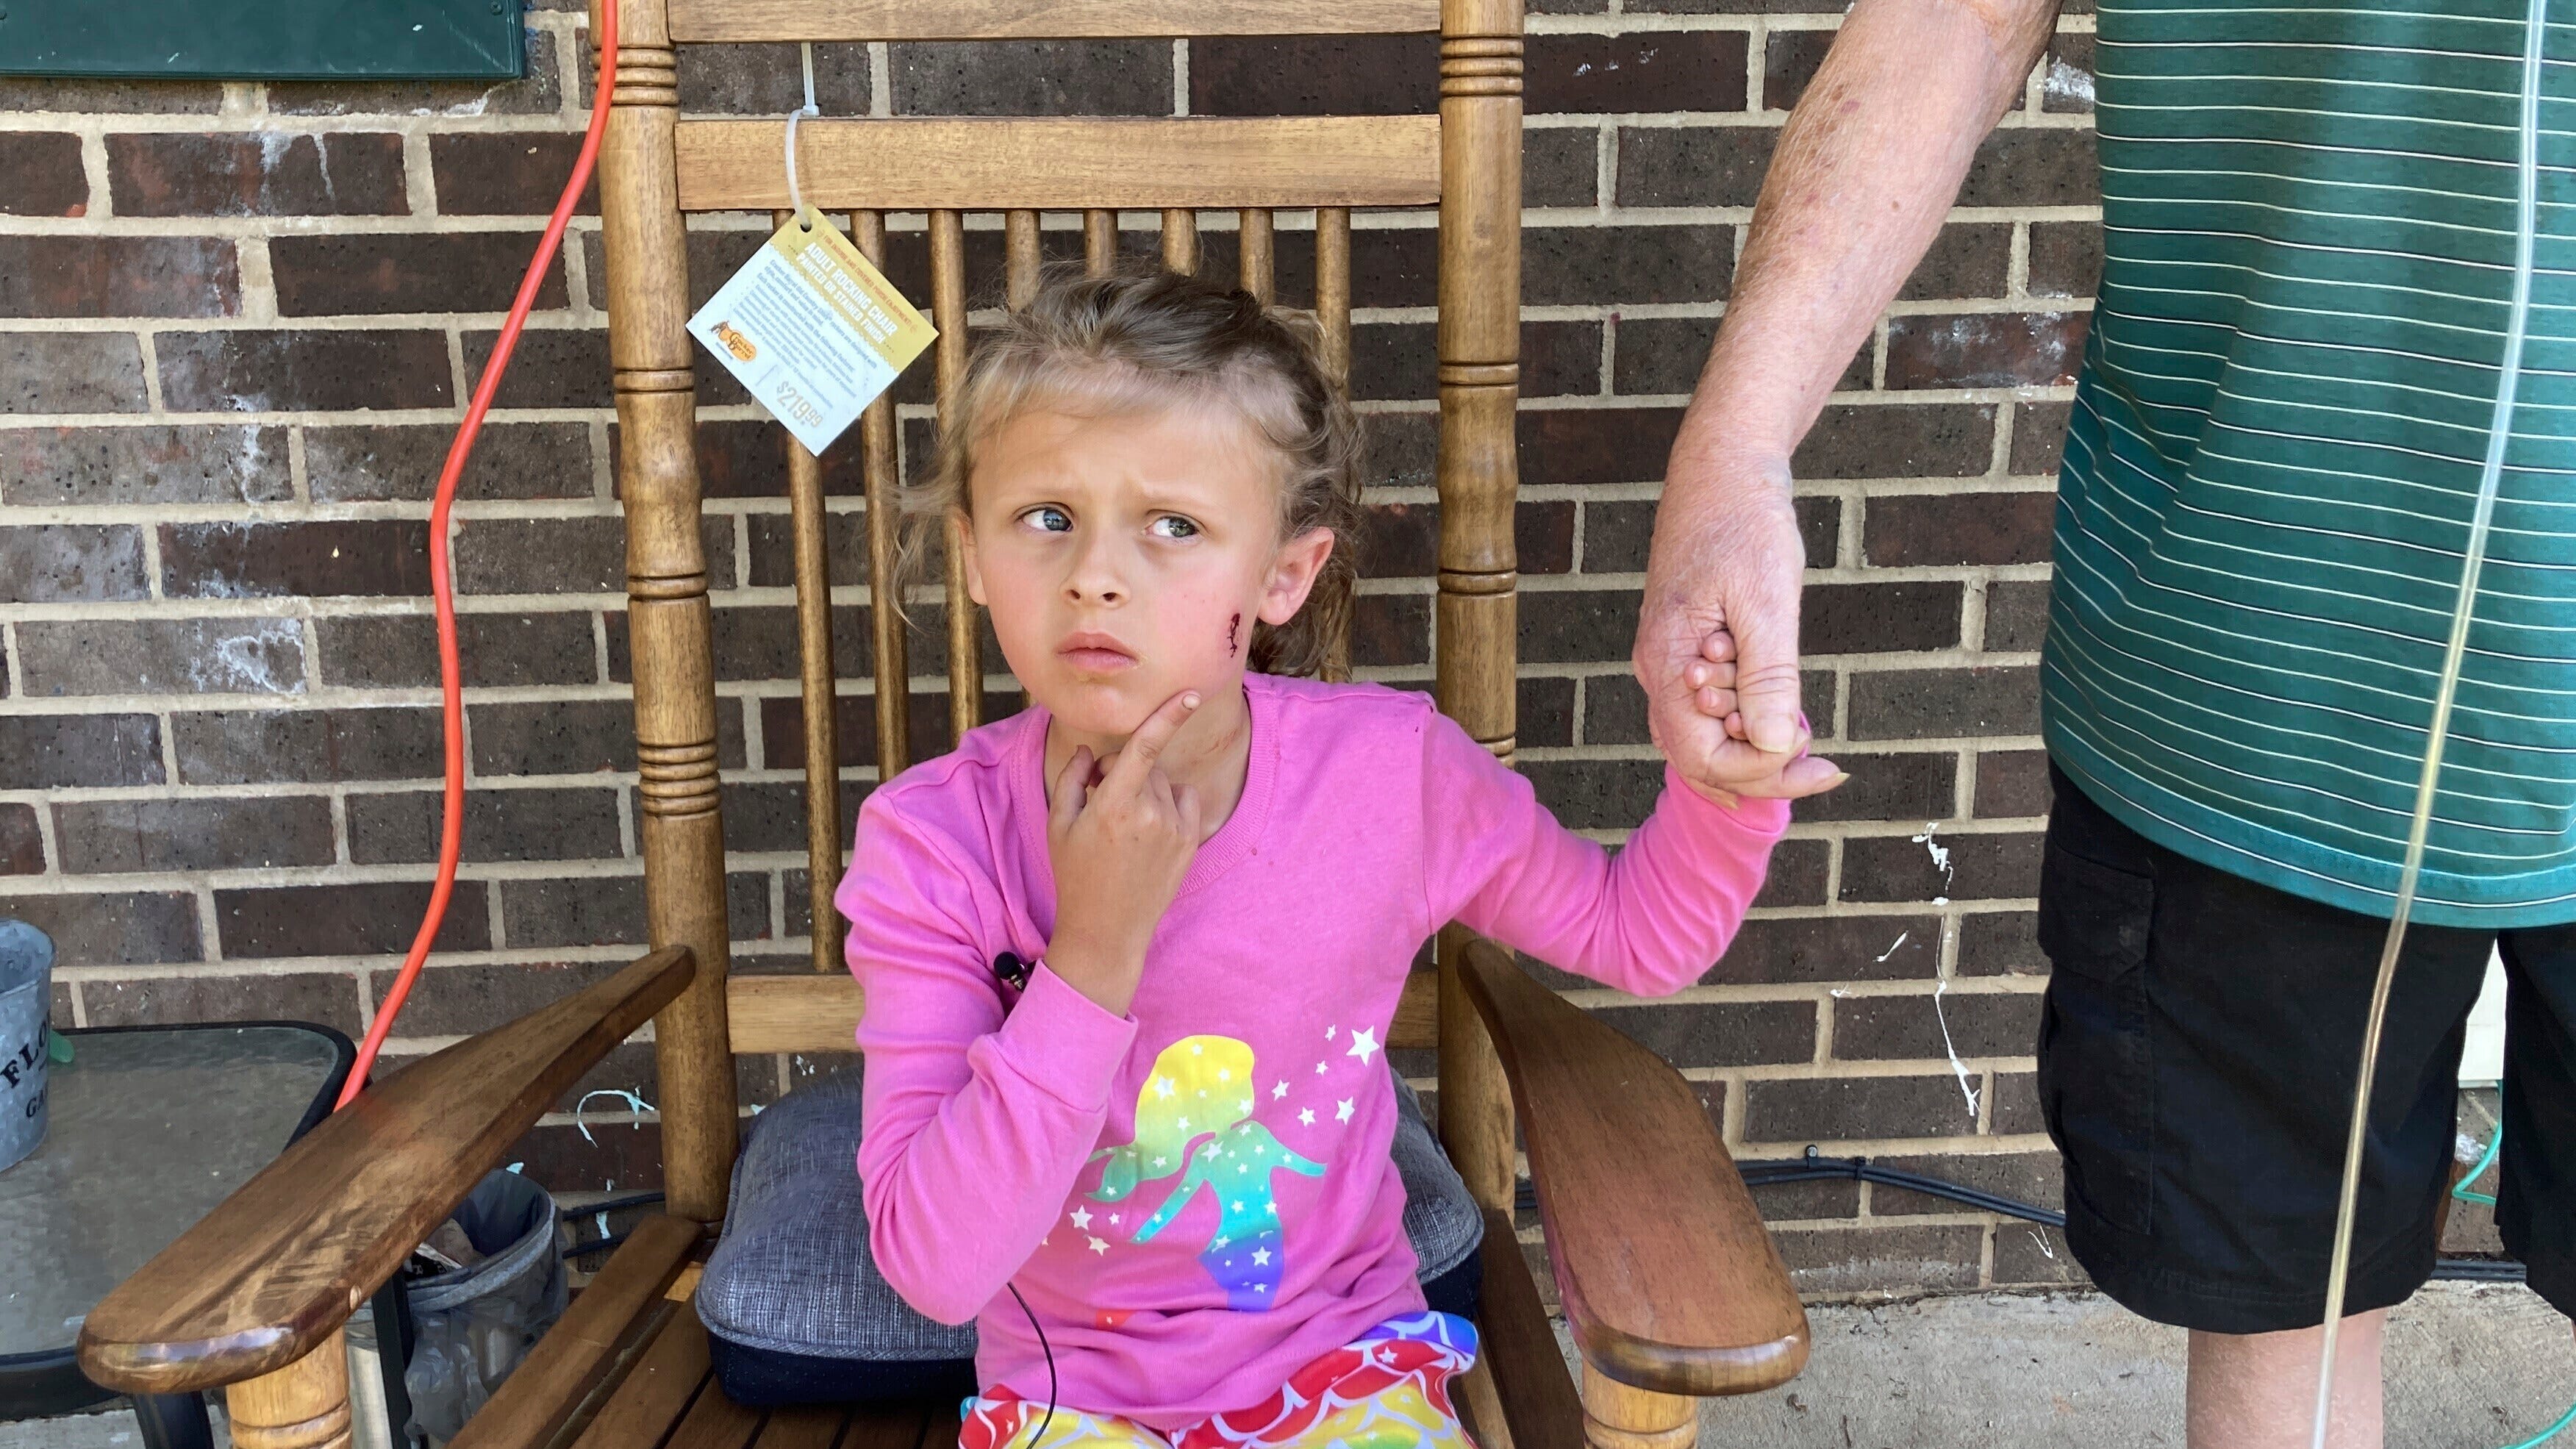 Kinsley White, 6, shows reporters a wound left on her face, Thursday, April 20, 2023 in Gastonia, N.C. A North Carolina man shot and wounded a 6-year-old girl and her parents after children went to retrieve a basketball that had rolled into his yard, according to neighbors and the girl's family — another in a string of recent shootings sparked by seemingly trivial reasons. (Kara Fohner/The Gaston Gazette via AP)